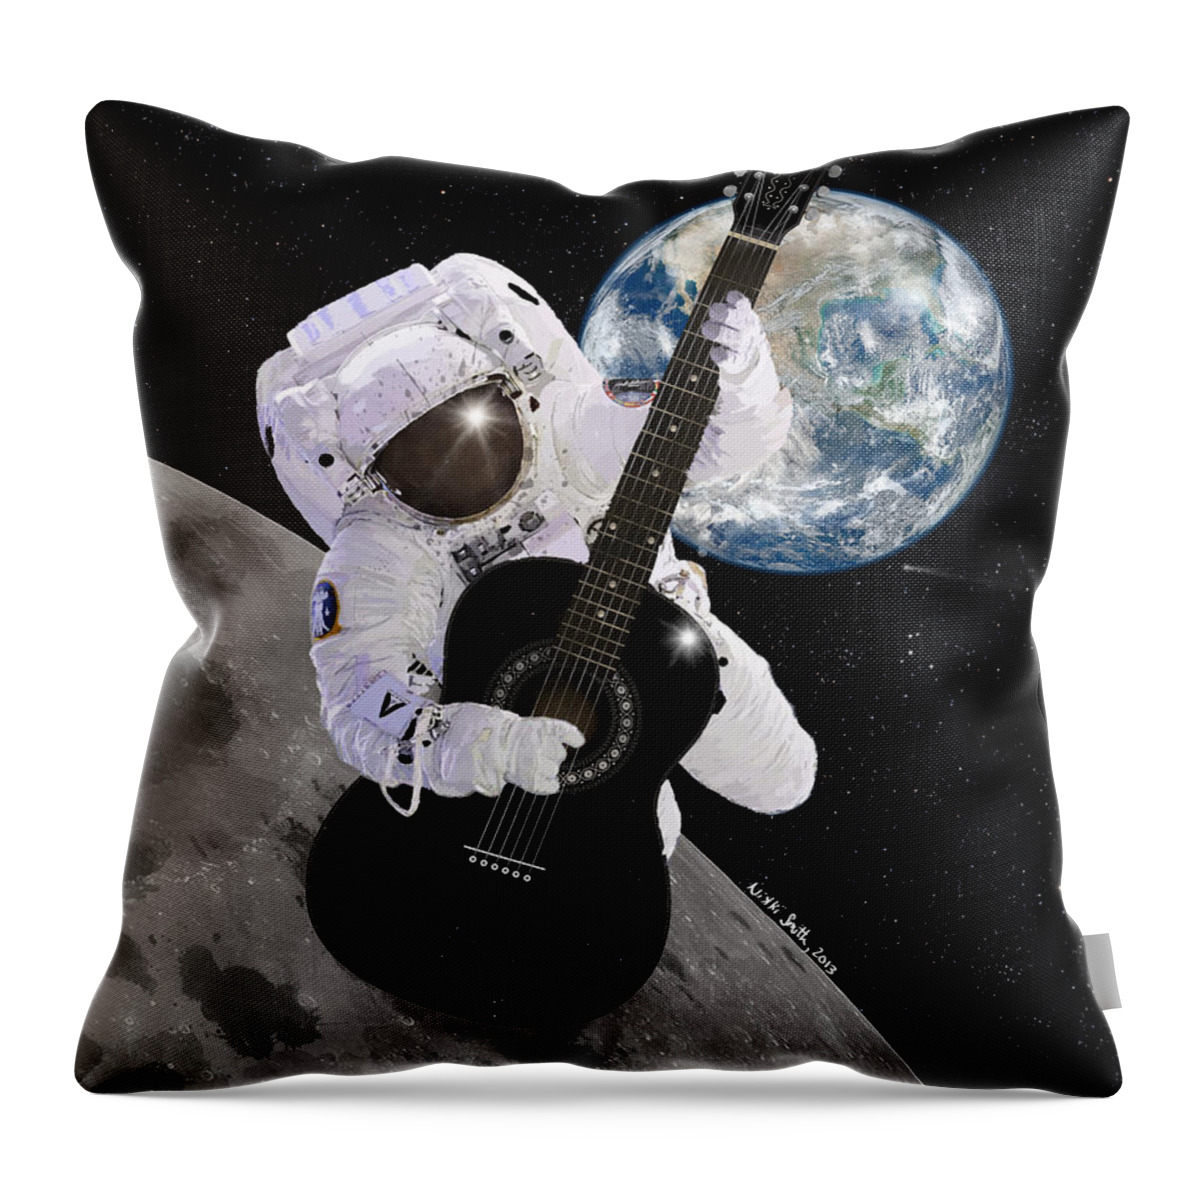 Astronaut Throw Pillow featuring the digital art Ground Control to Major Tom by Nikki Marie Smith